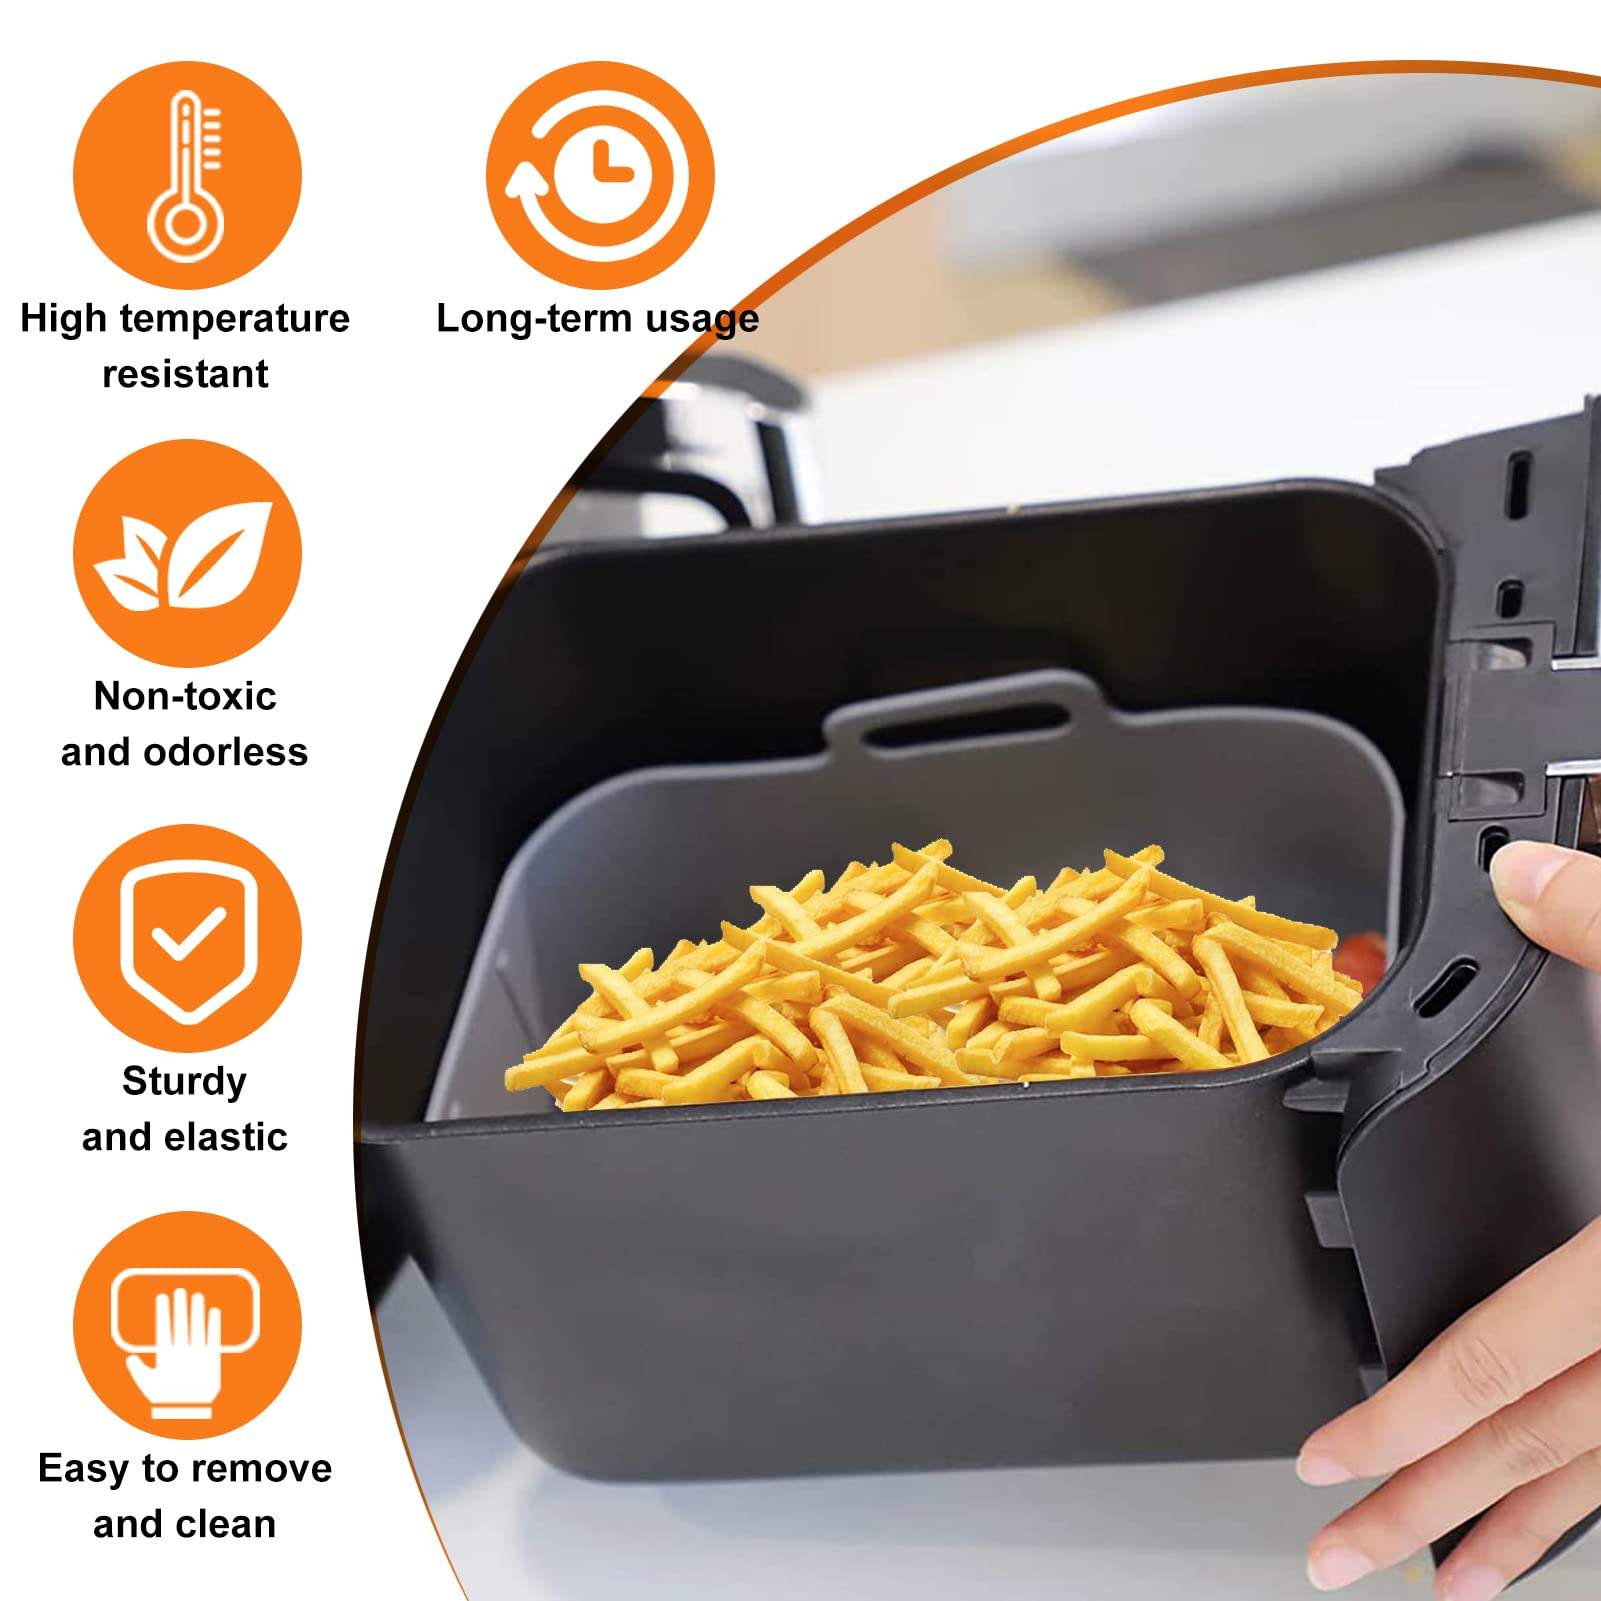 Air Fryer Silicone Pot with Handle Reusable Liner Heat Resistant Basket Rectangular Baking Accessories for Fryer, Oven and Microwave.